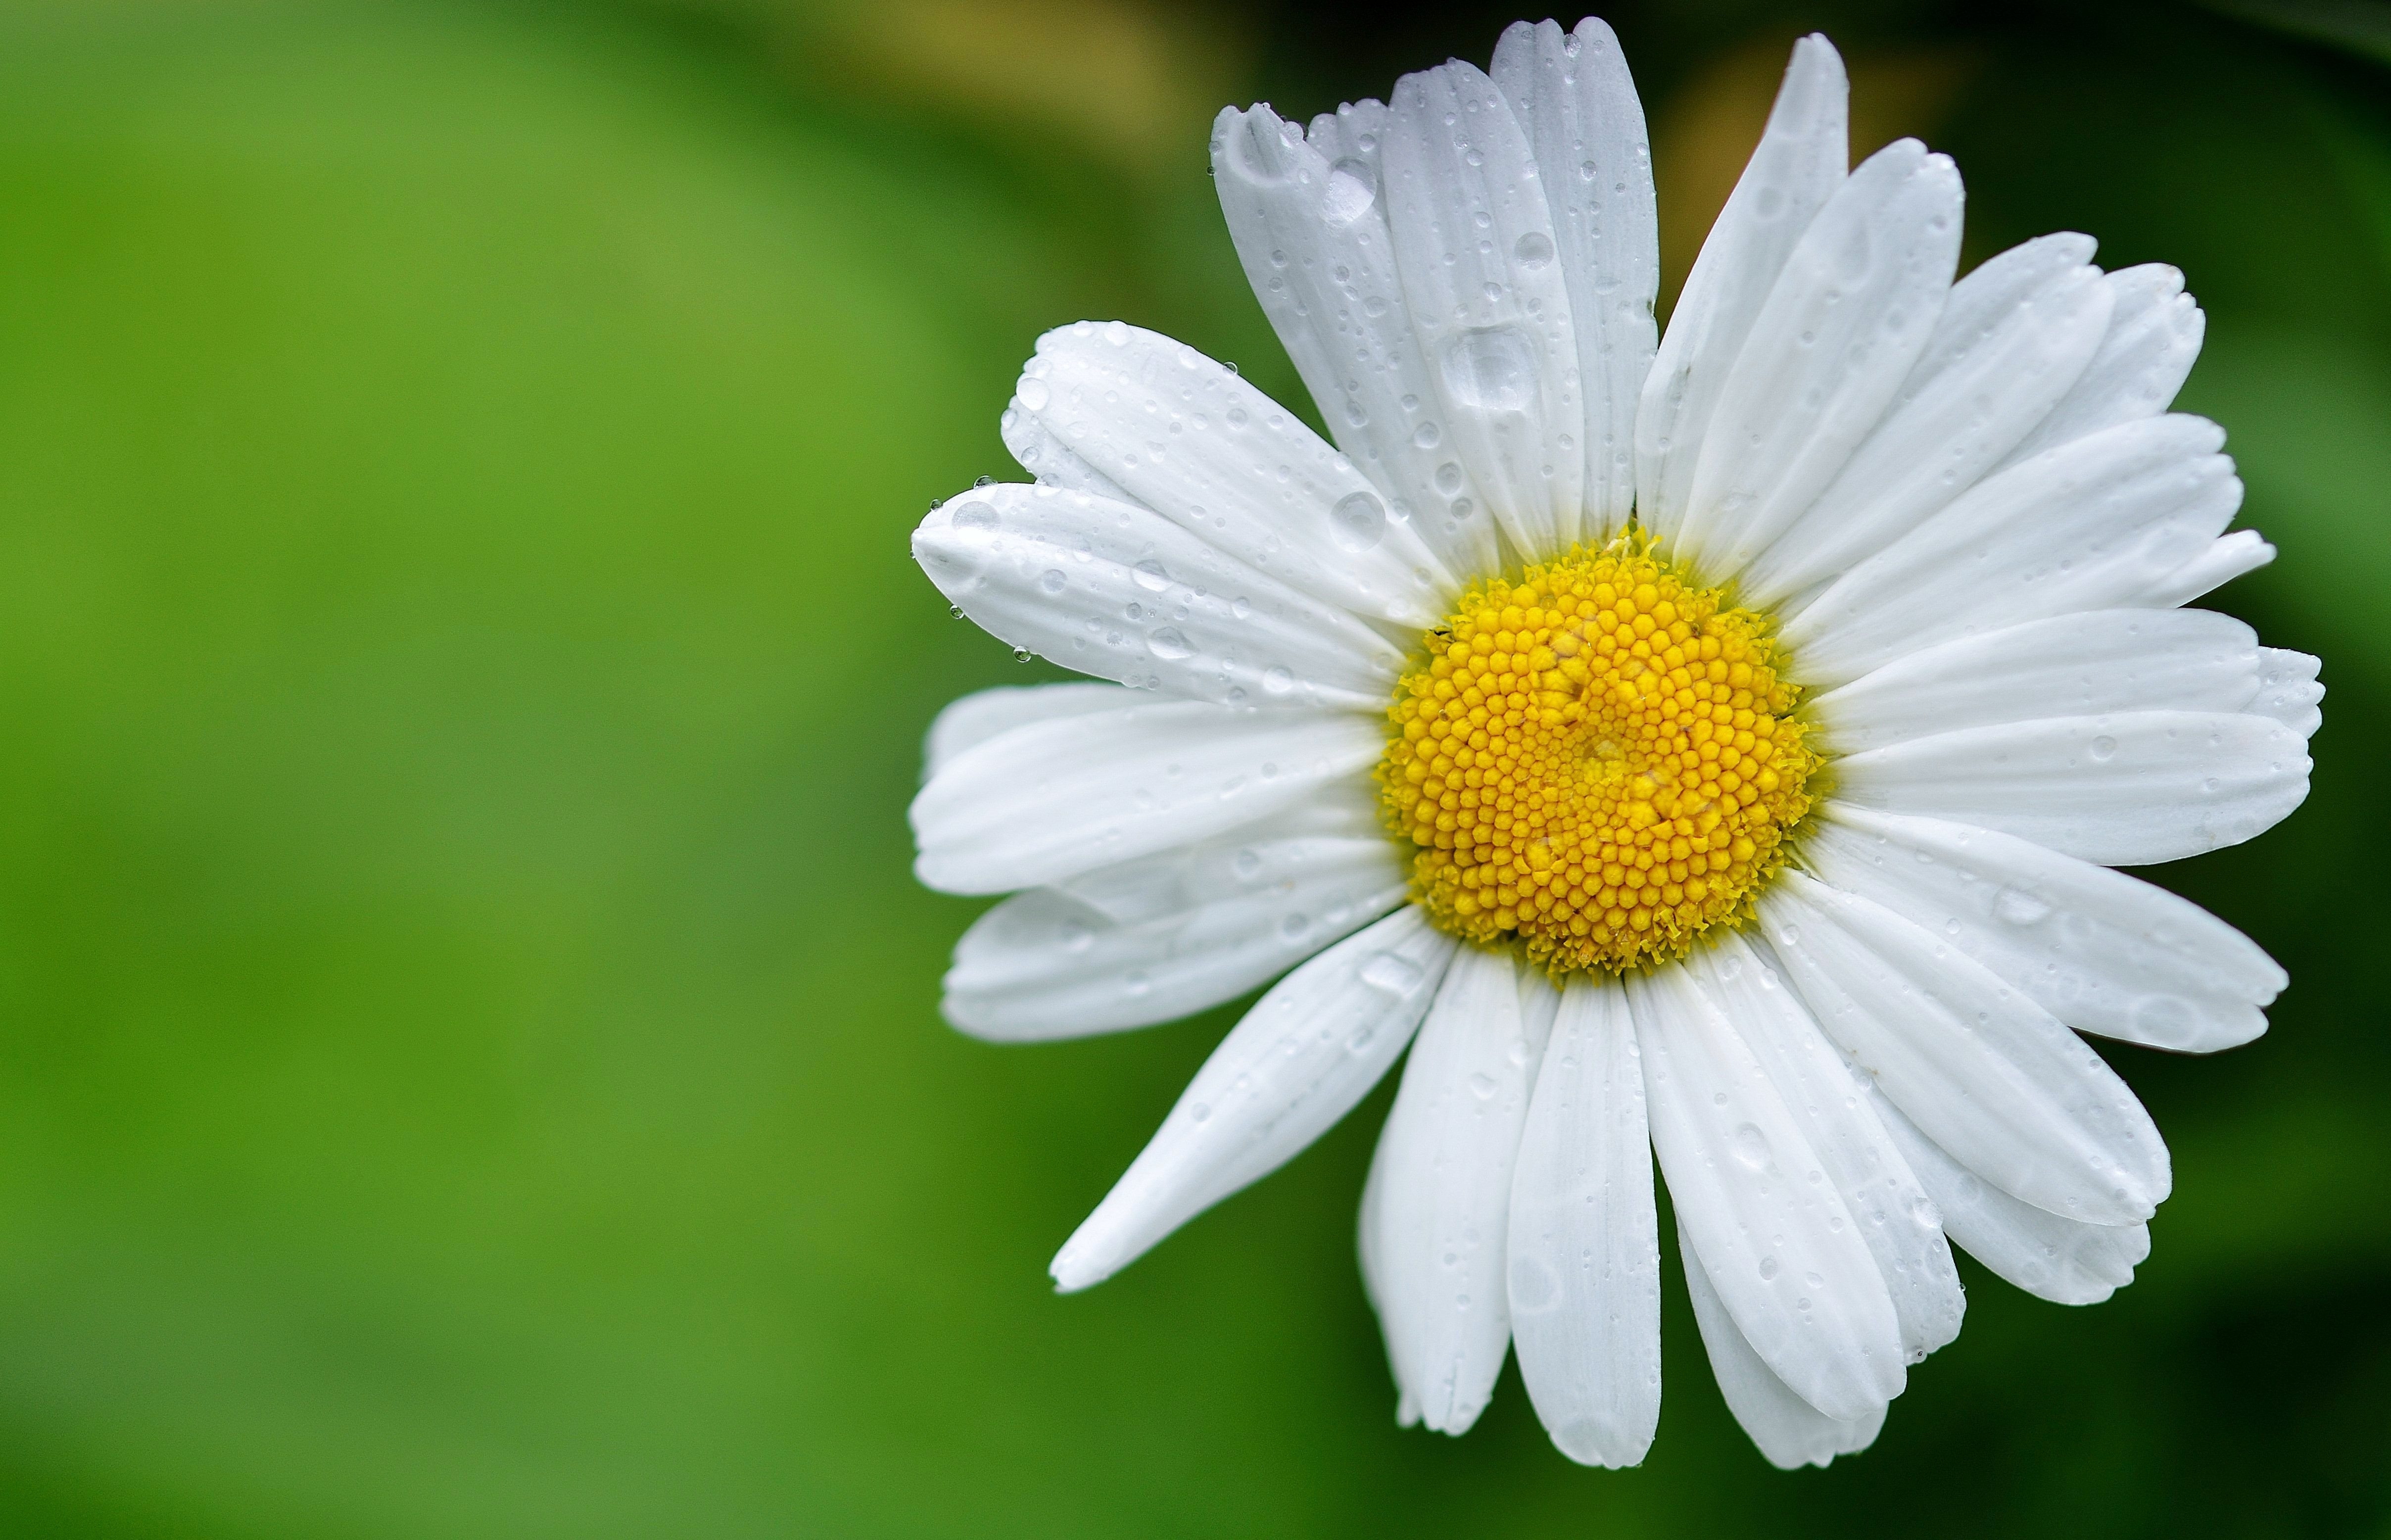 Daisy Wallpaper Image Photos Pictures Background